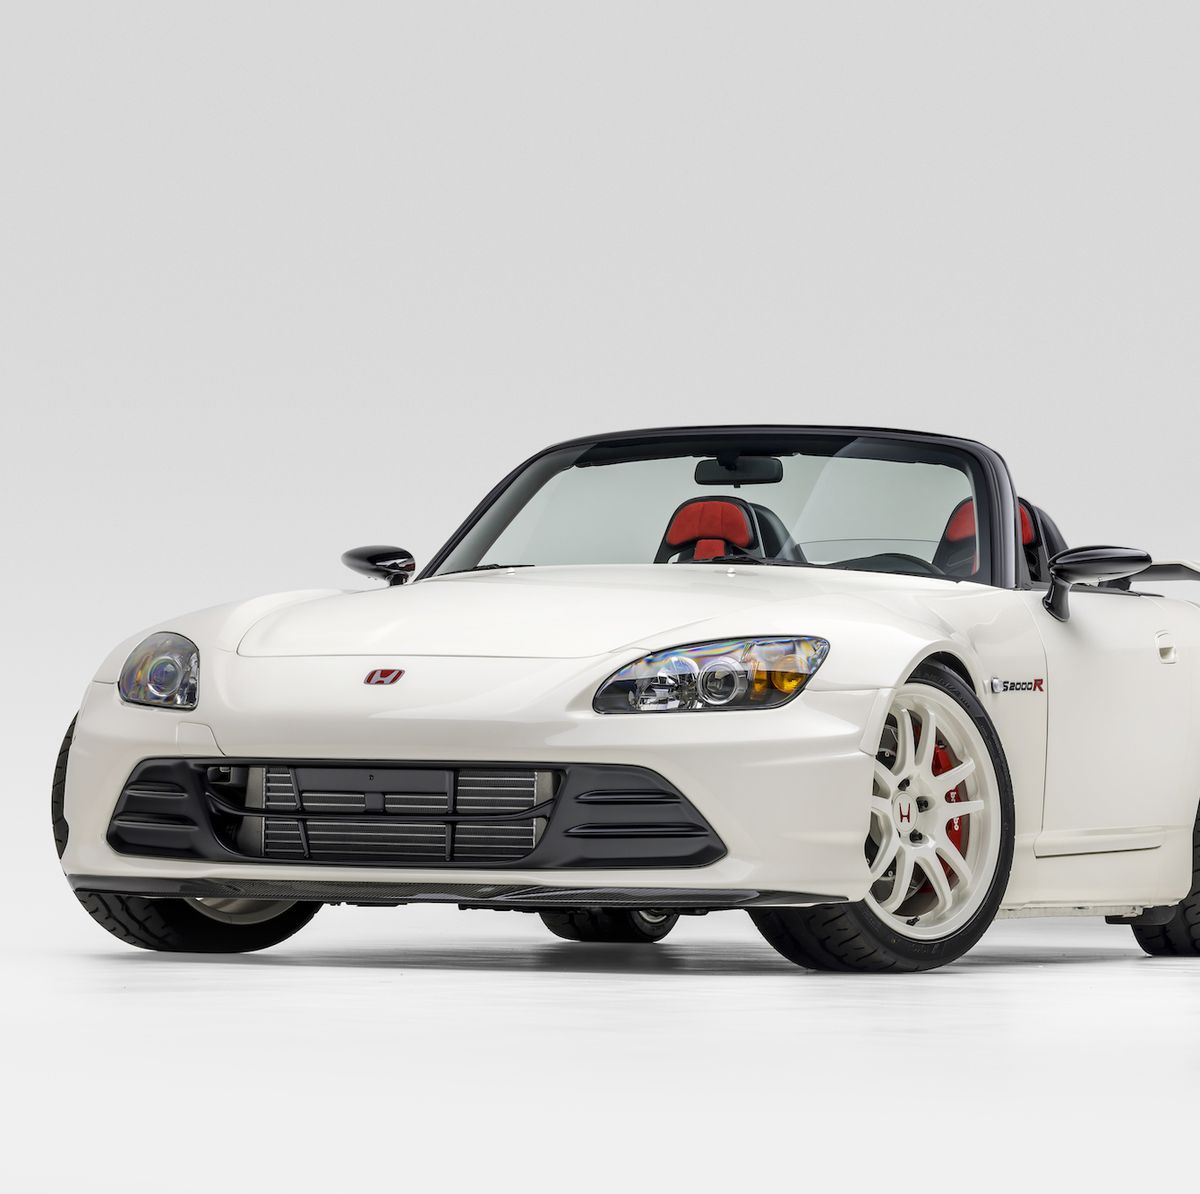 The Honda S2000R Is a Gorgeous, Civic Type R-Powered Restomod